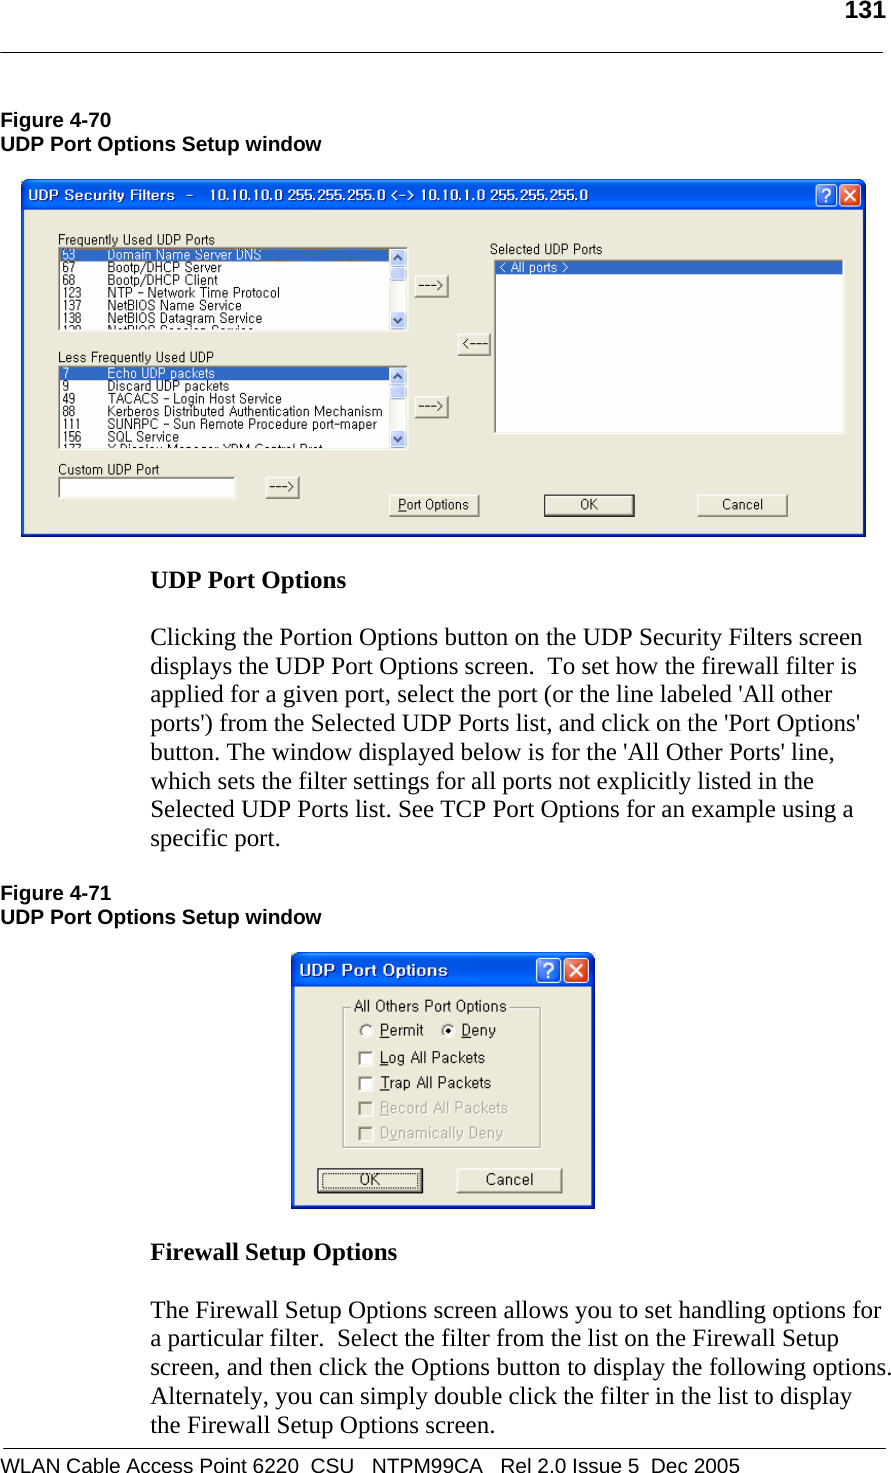   131  WLAN Cable Access Point 6220  CSU   NTPM99CA   Rel 2.0 Issue 5  Dec 2005 Figure 4-70 UDP Port Options Setup window    UDP Port Options   Clicking the Portion Options button on the UDP Security Filters screen displays the UDP Port Options screen.  To set how the firewall filter is applied for a given port, select the port (or the line labeled &apos;All other ports&apos;) from the Selected UDP Ports list, and click on the &apos;Port Options&apos; button. The window displayed below is for the &apos;All Other Ports&apos; line, which sets the filter settings for all ports not explicitly listed in the Selected UDP Ports list. See TCP Port Options for an example using a specific port.  Figure 4-71 UDP Port Options Setup window    Firewall Setup Options   The Firewall Setup Options screen allows you to set handling options for a particular filter.  Select the filter from the list on the Firewall Setup screen, and then click the Options button to display the following options. Alternately, you can simply double click the filter in the list to display the Firewall Setup Options screen. 